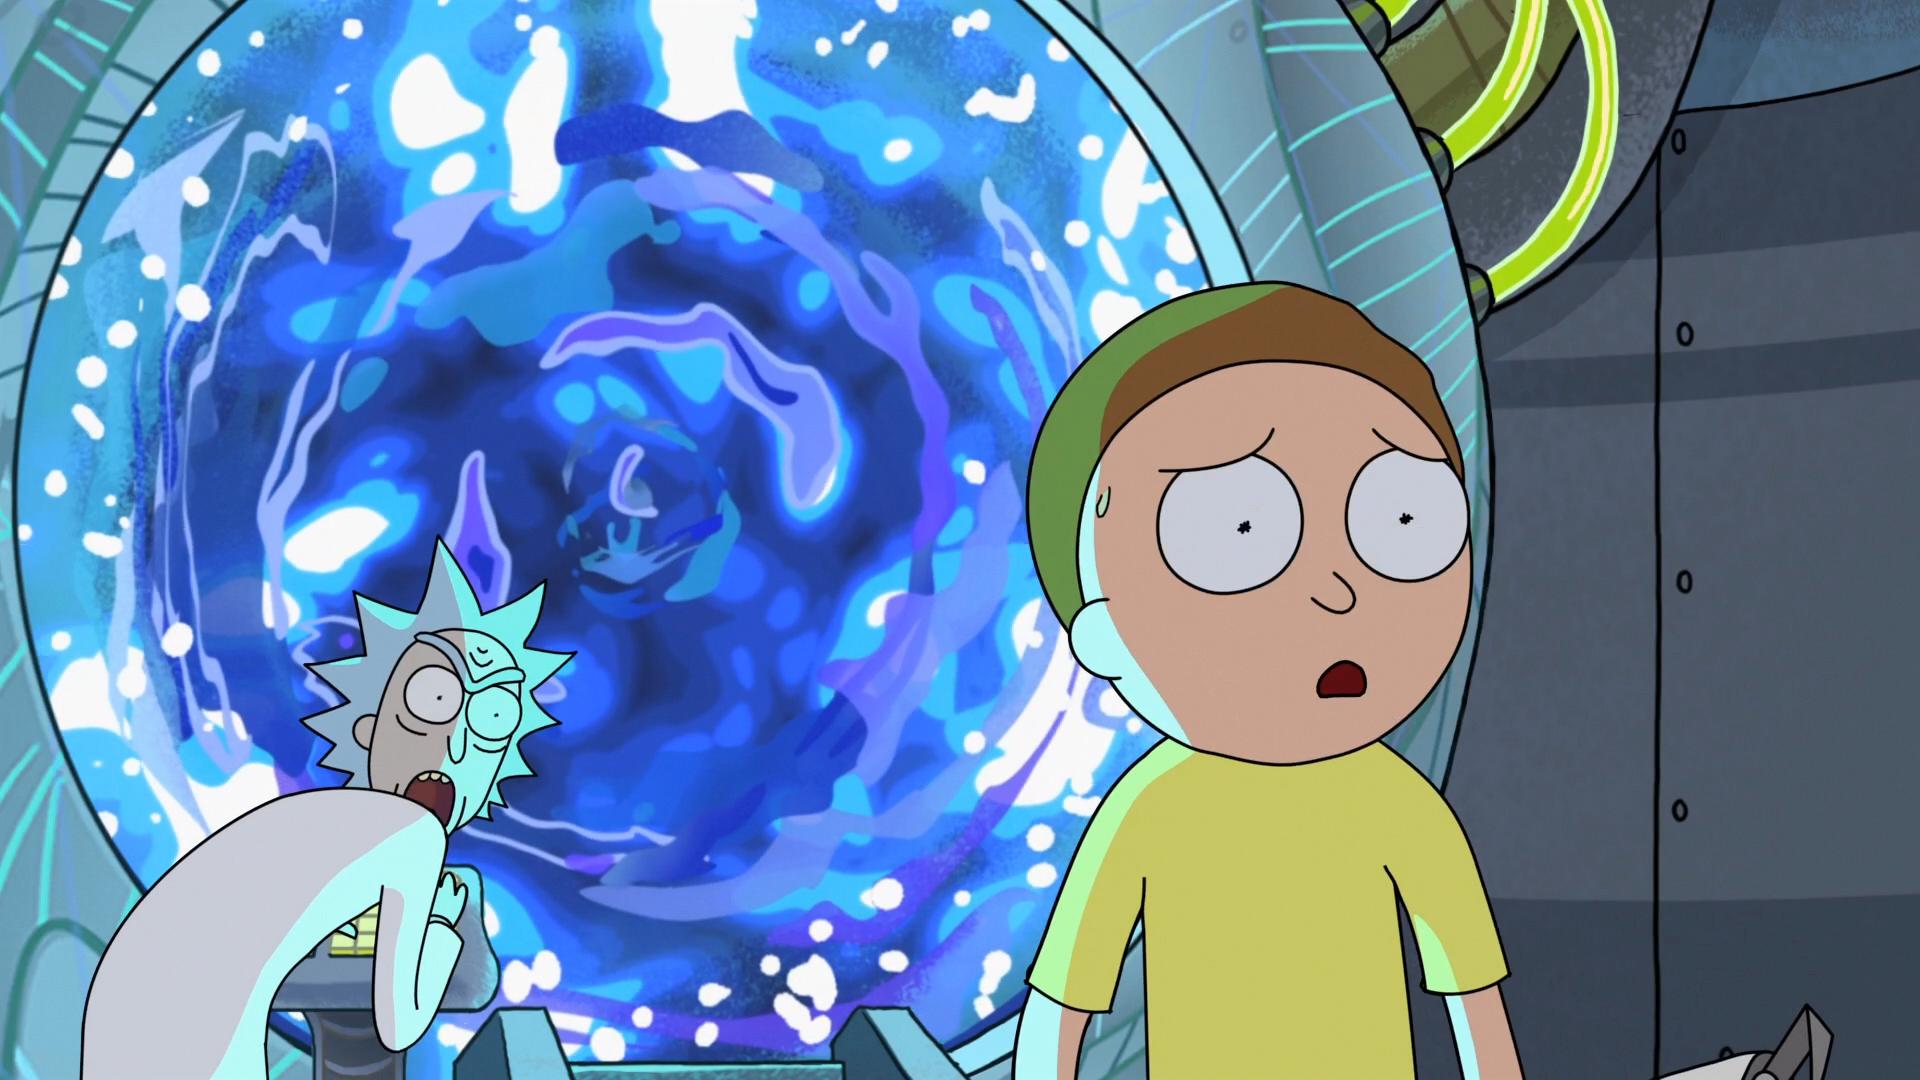 Free HD rick and morty, tv show, morty smith, rick sanchez